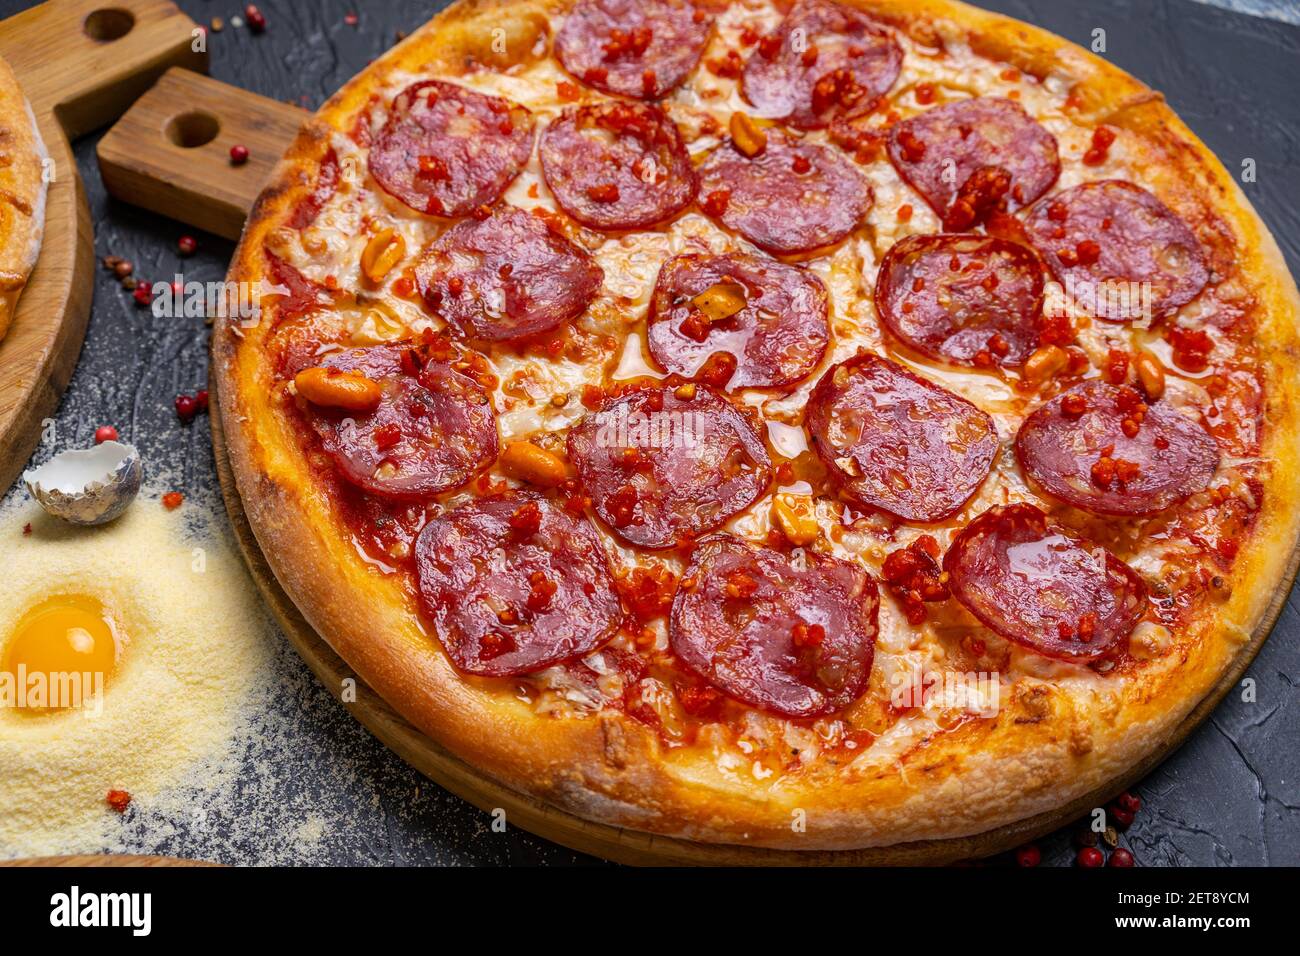 Pepperoni pizza on plate Stock Photo